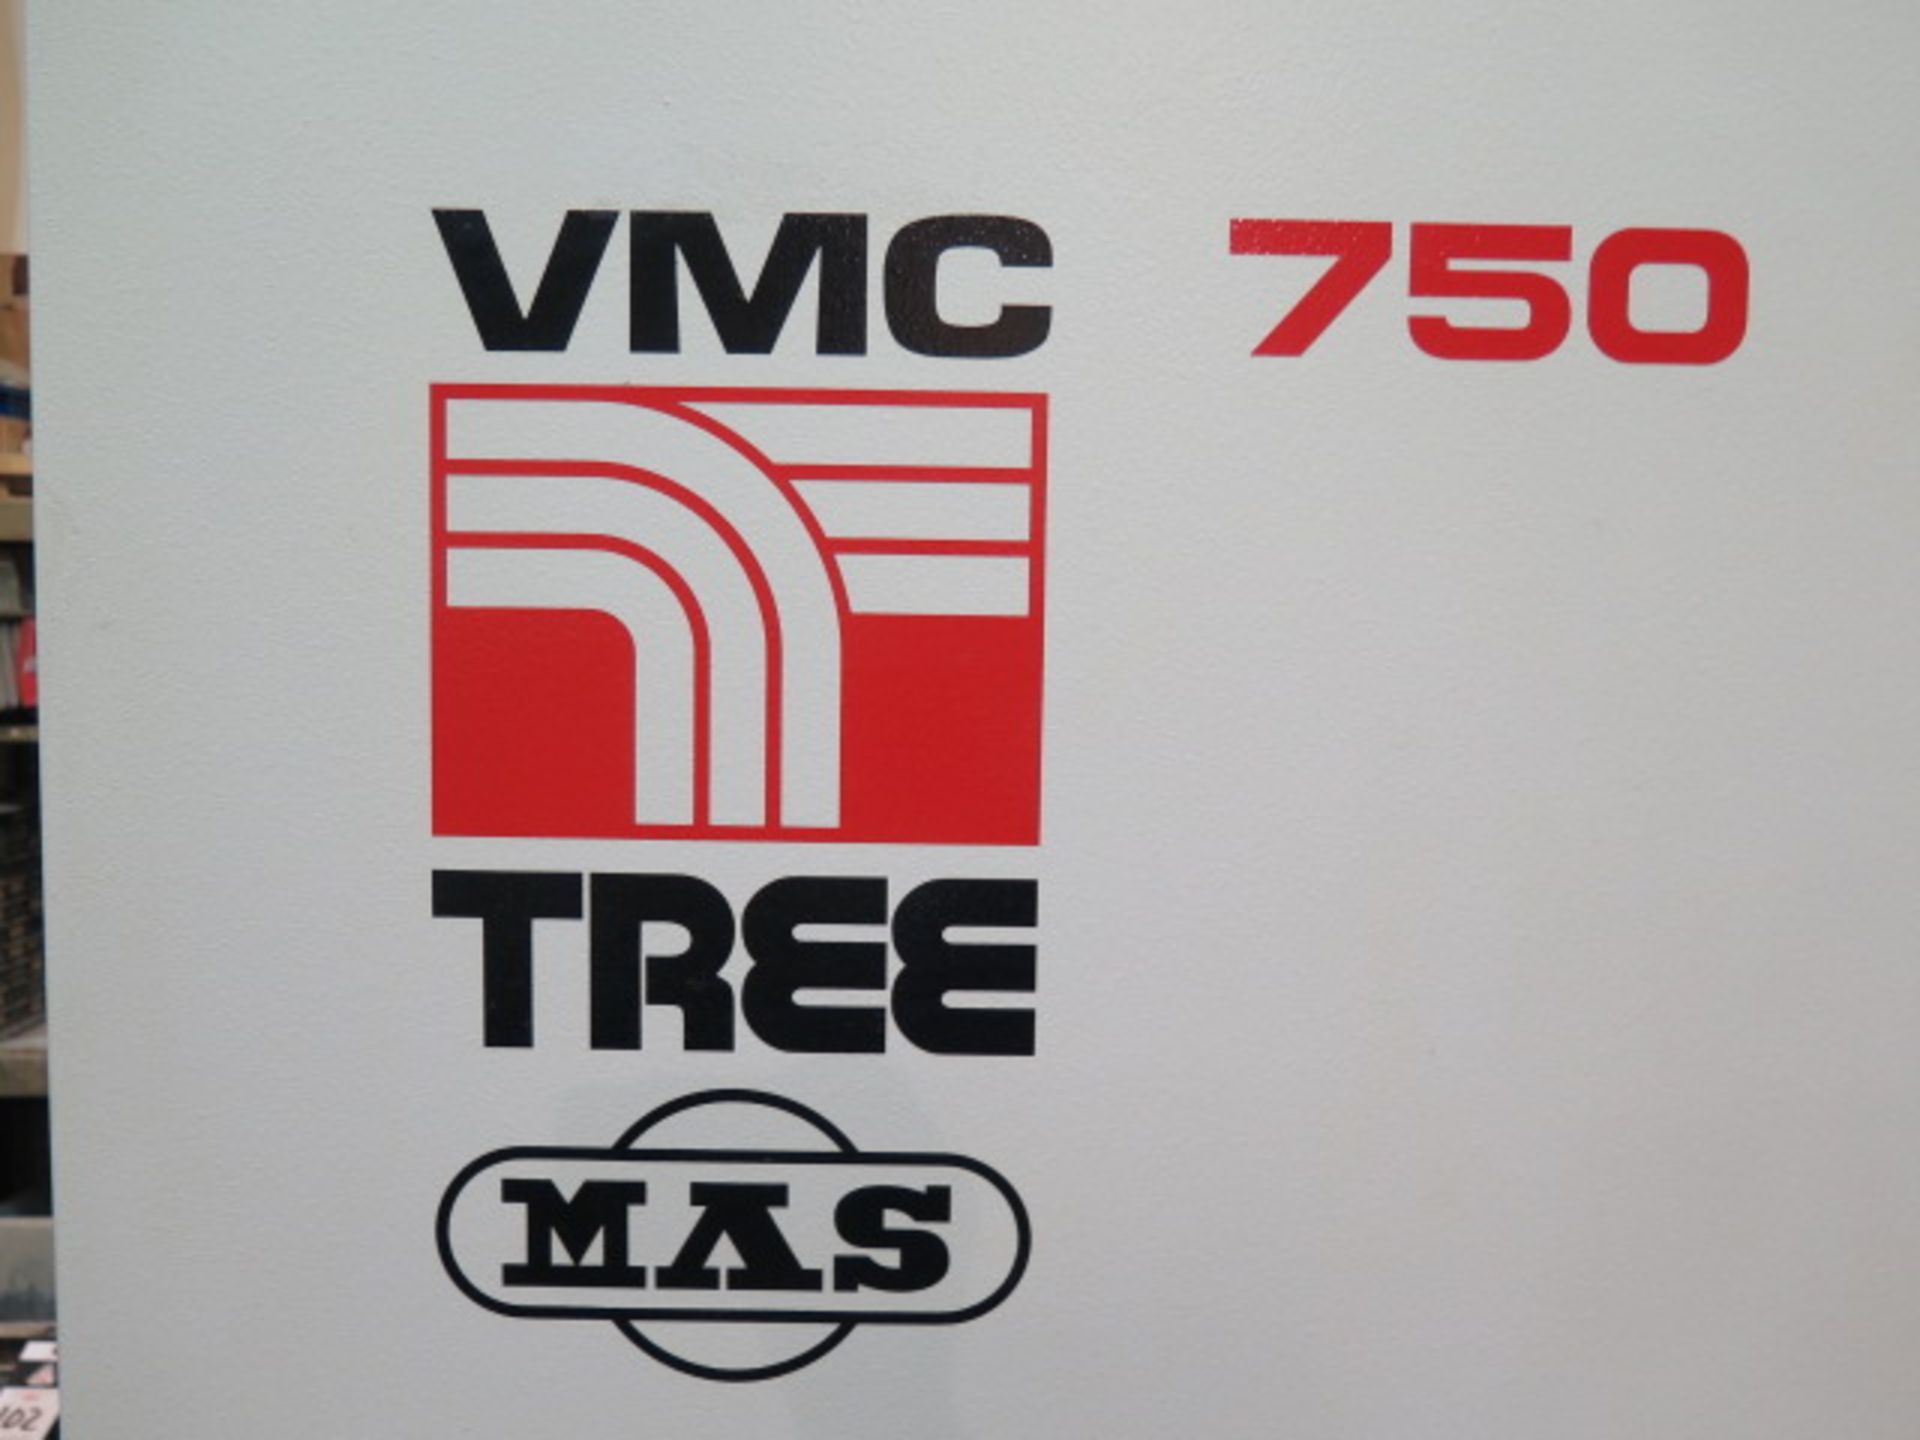 Tree / MAS VMC750 CNC Vertical Machining Center s/n 985961201 w/ Tree PC-2100 Controls, SOLD AS IS - Image 11 of 16